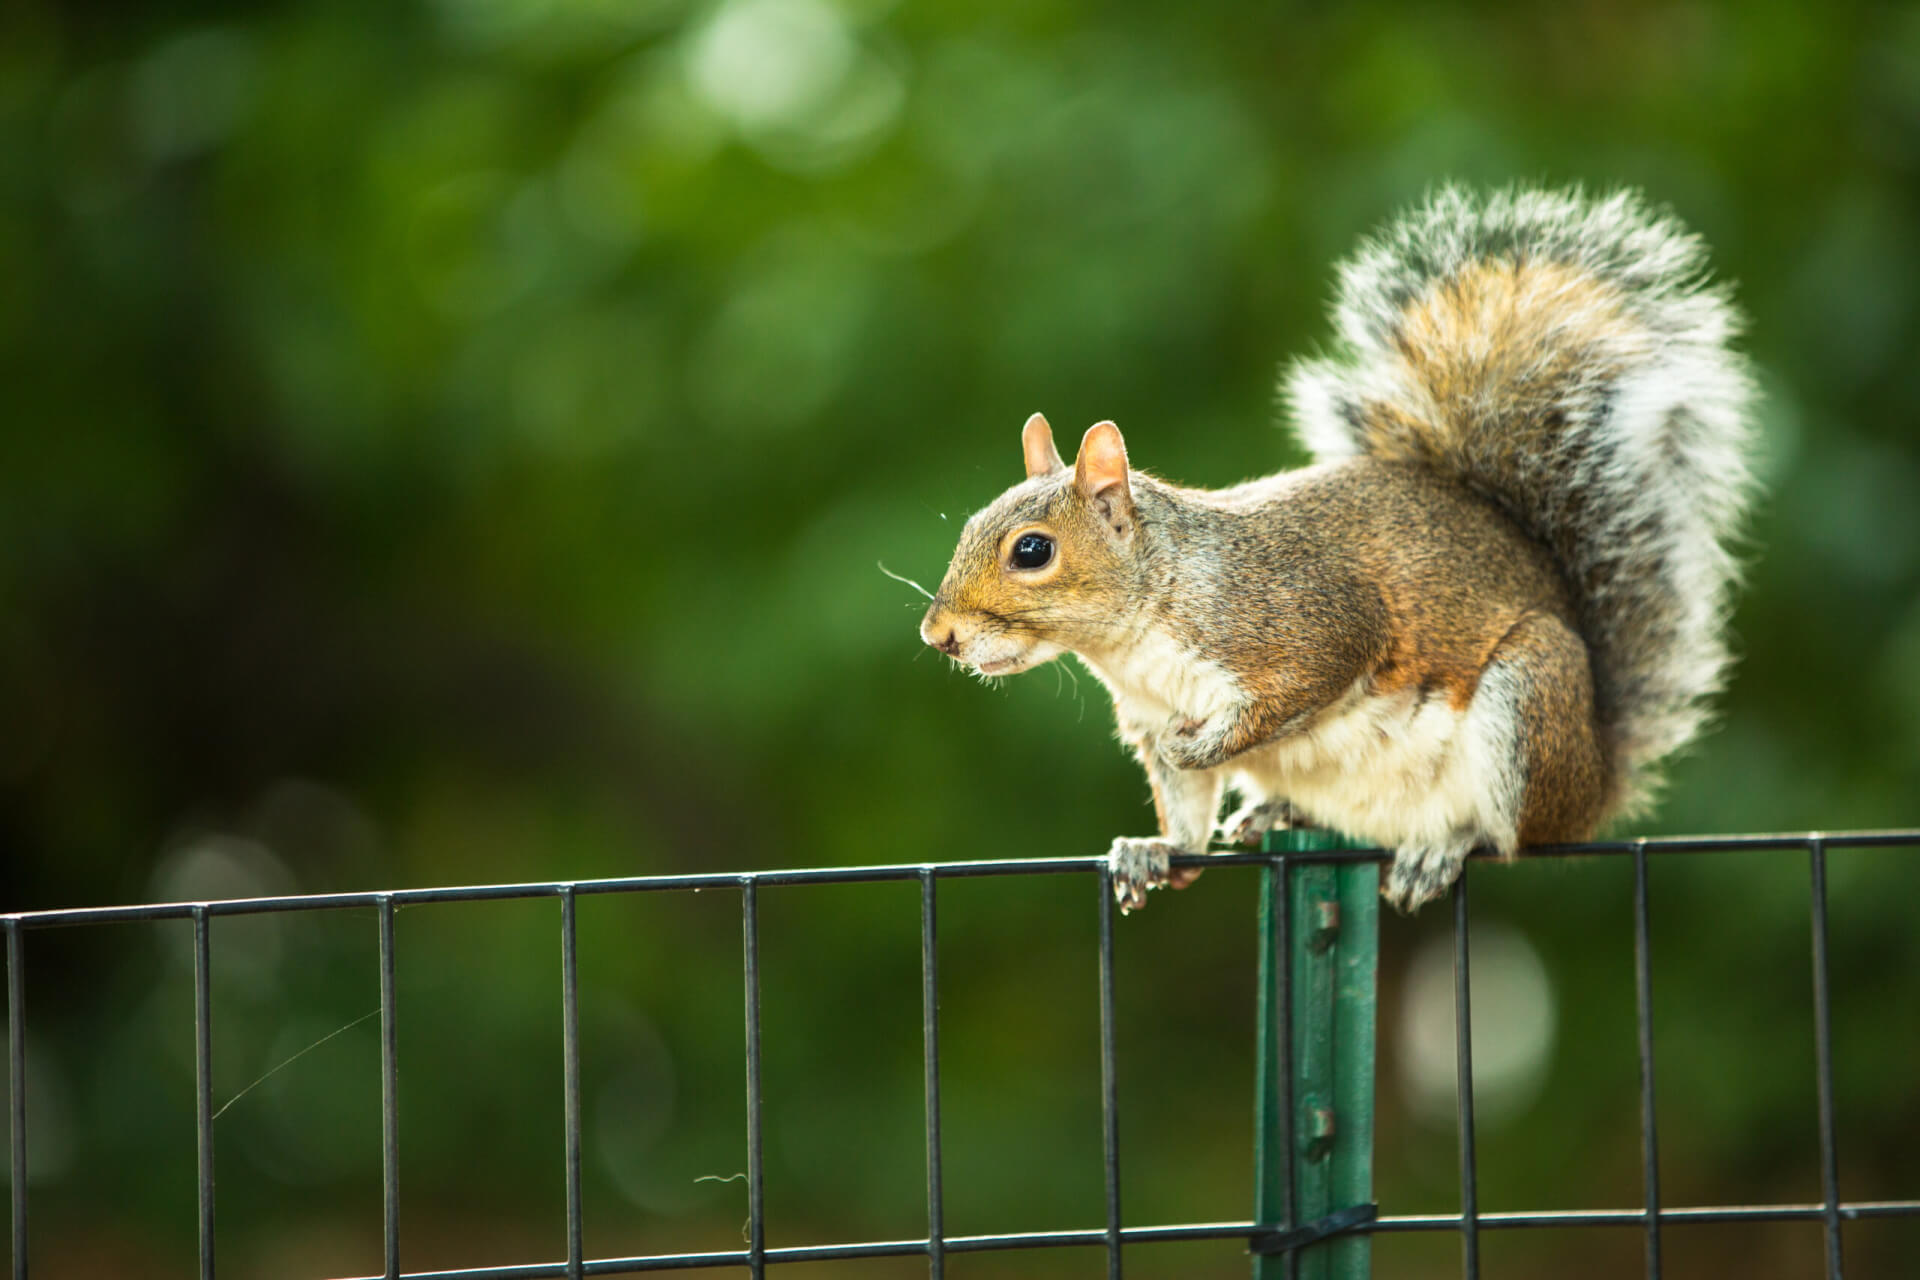 5 Signs You May Have Squirrels in Your Attic